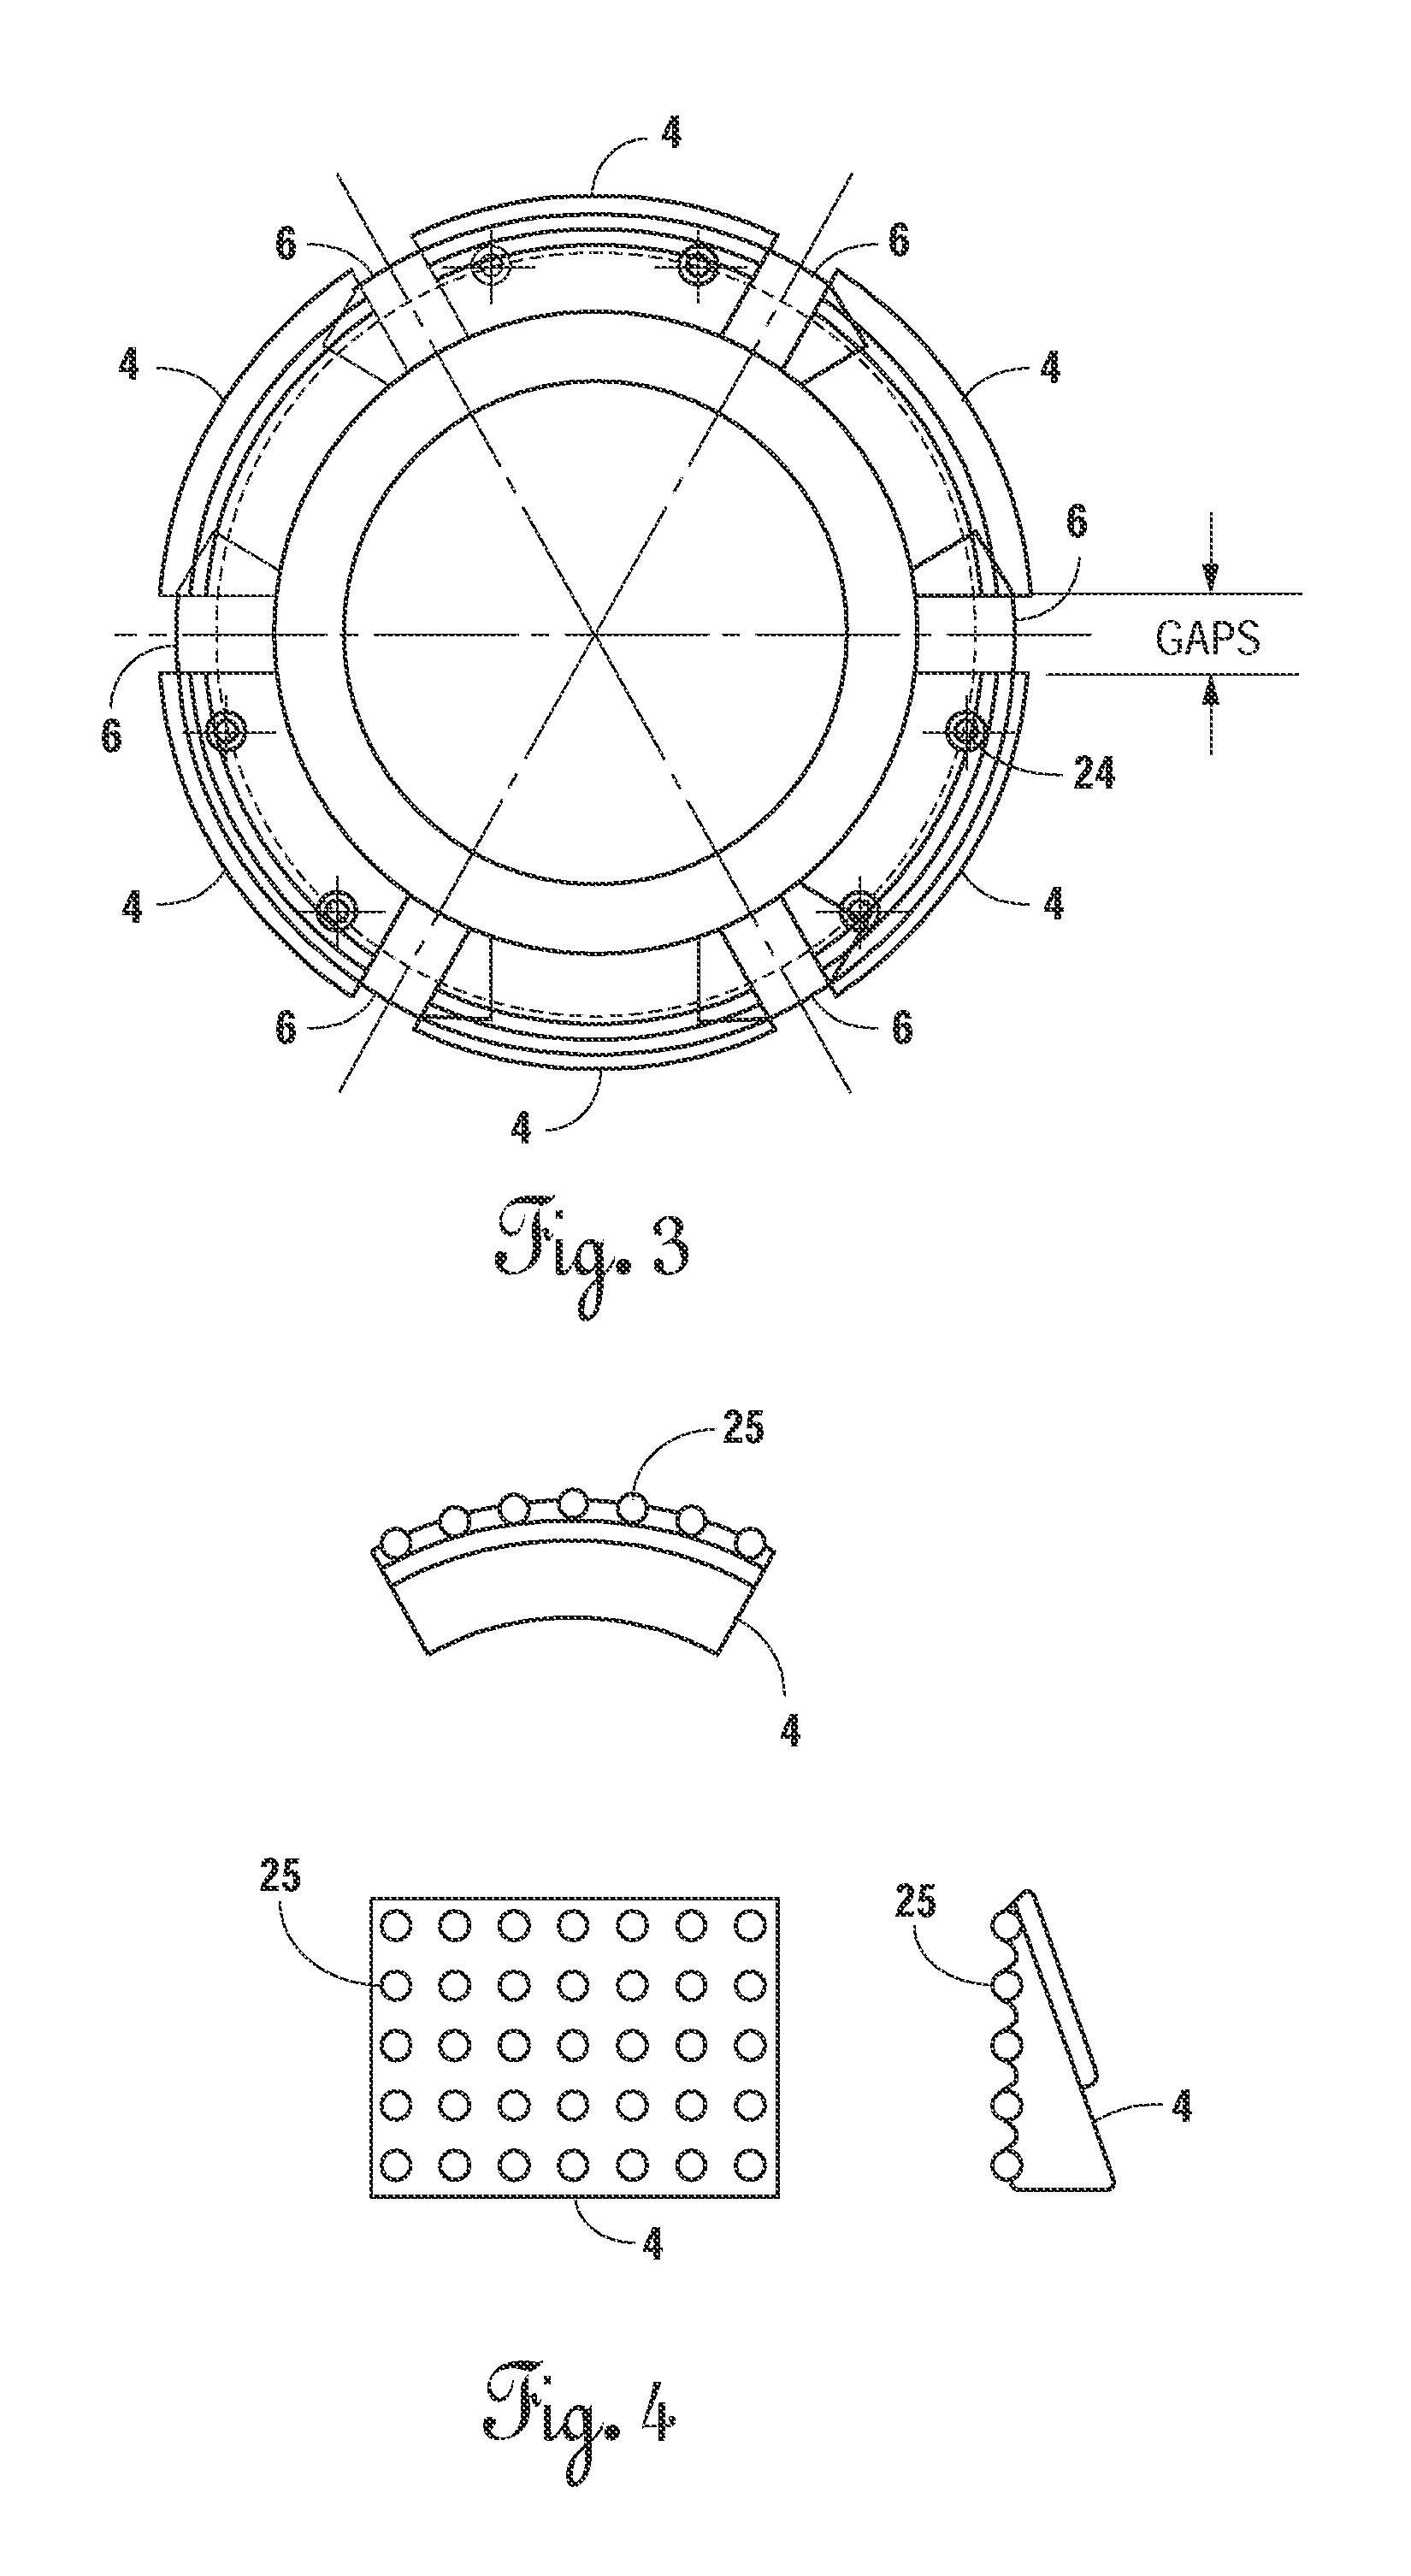 Ultra-short slip and packing element system